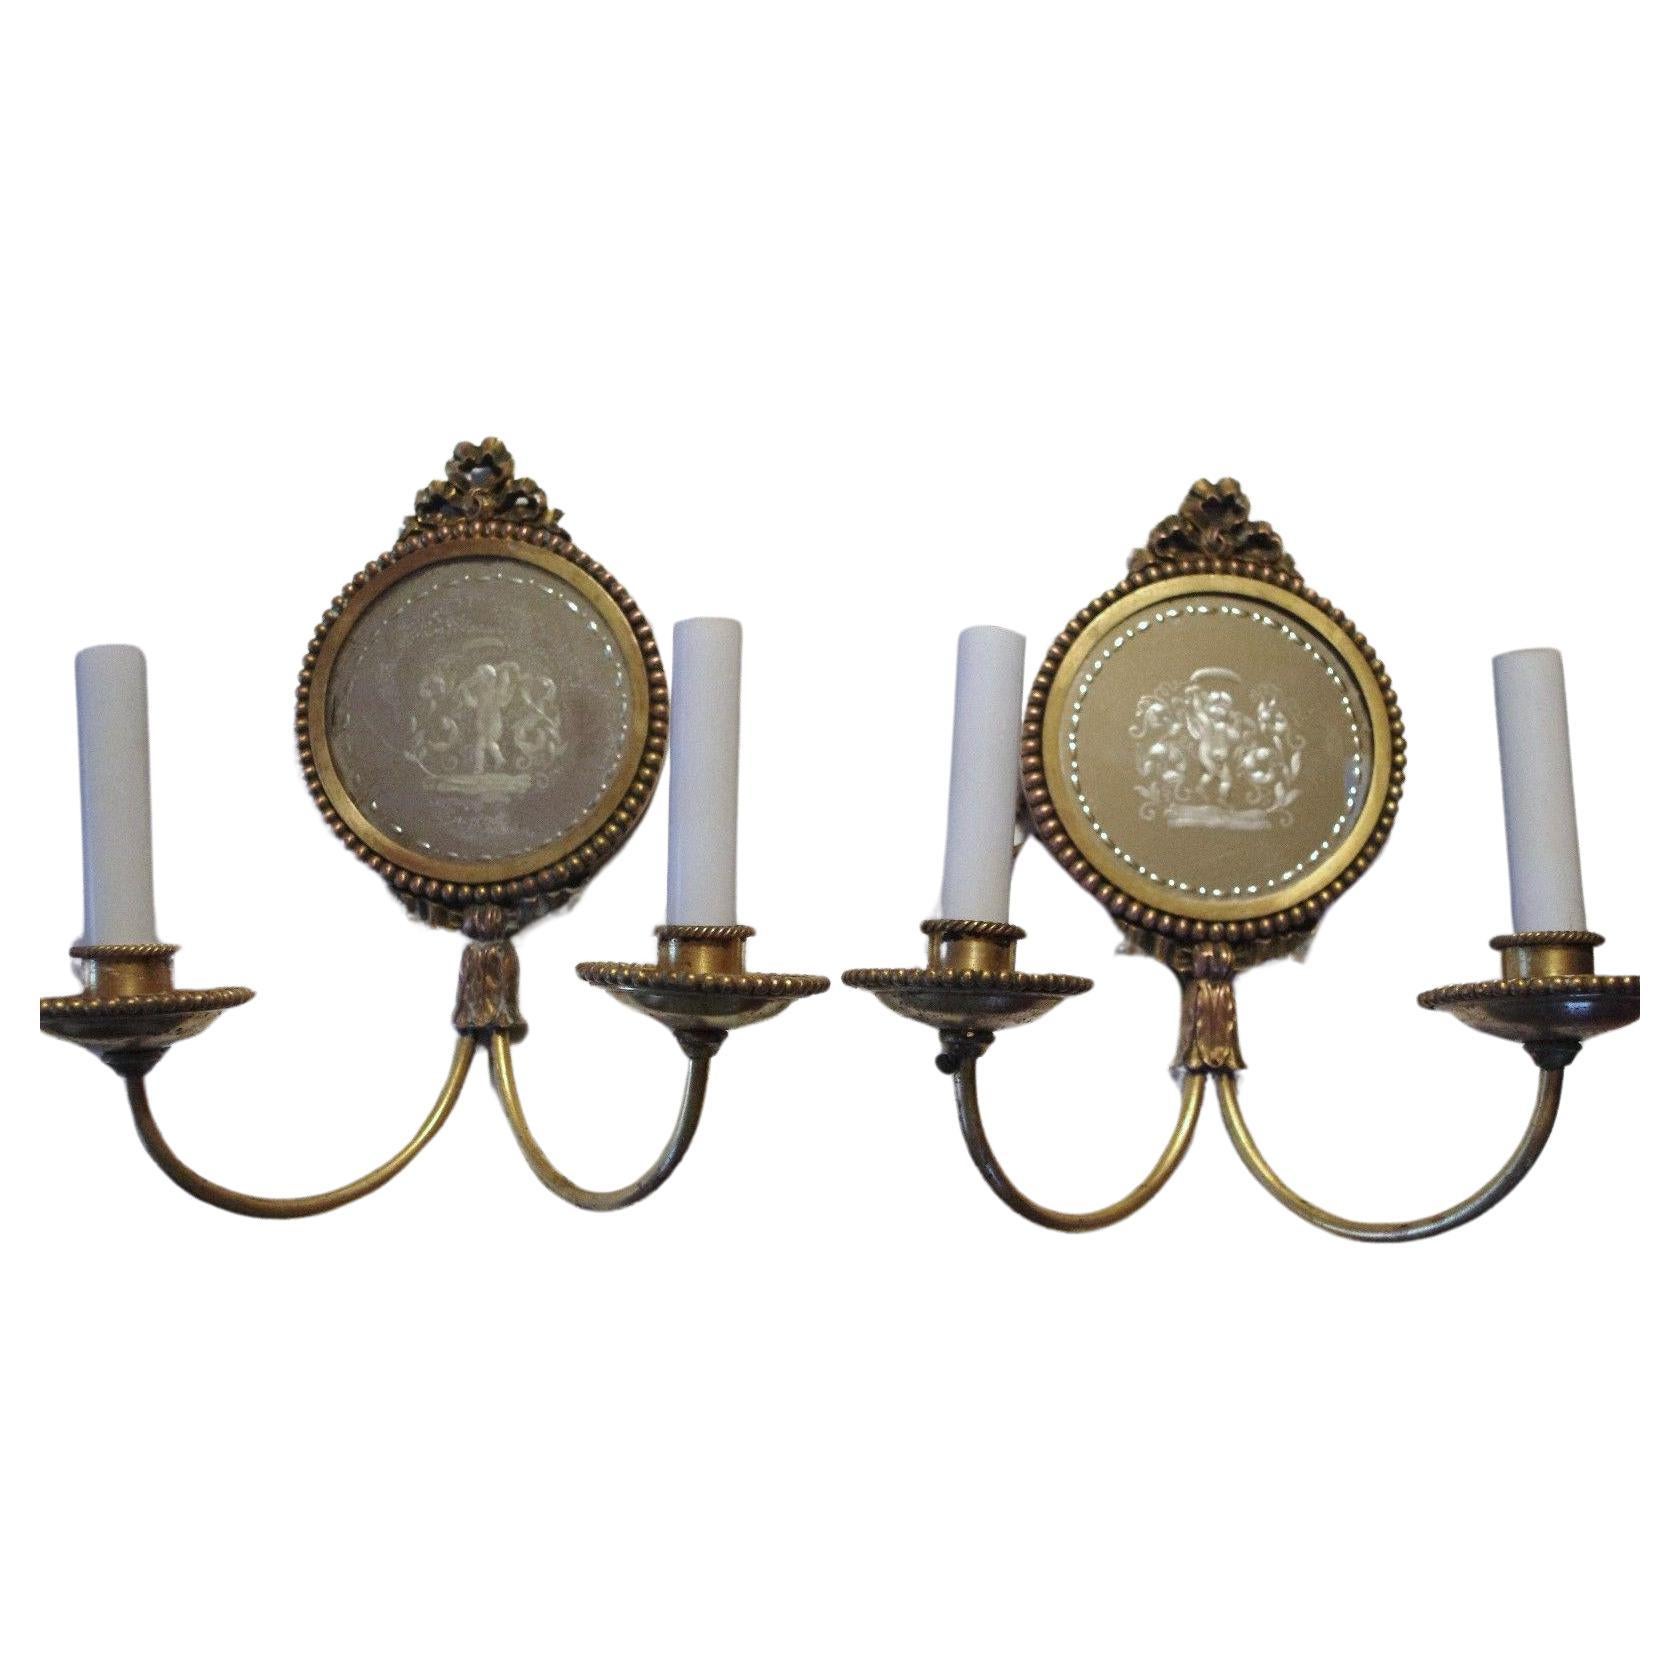 Neoclassical Pair 19thc Neoclassic Bronzw/Eglomise Cherubs Cavorting Wall Sconces by Caldwell For Sale